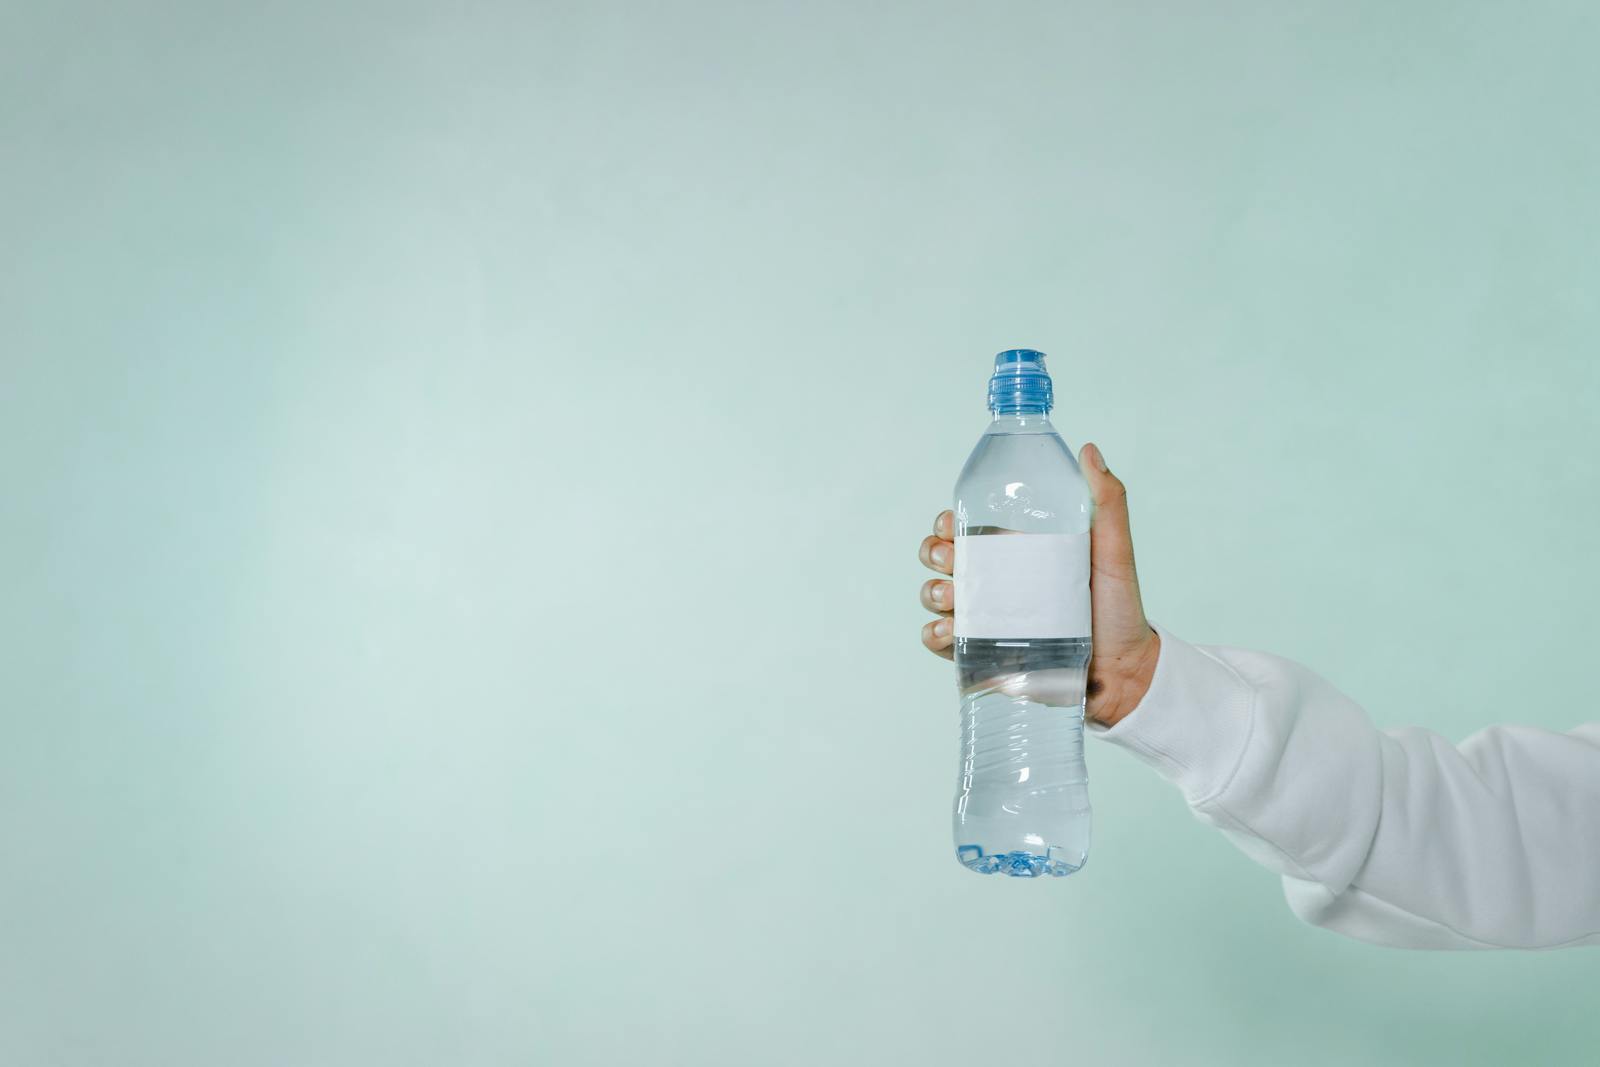 Photo of a Person's Hand Holding a Bottle of Water